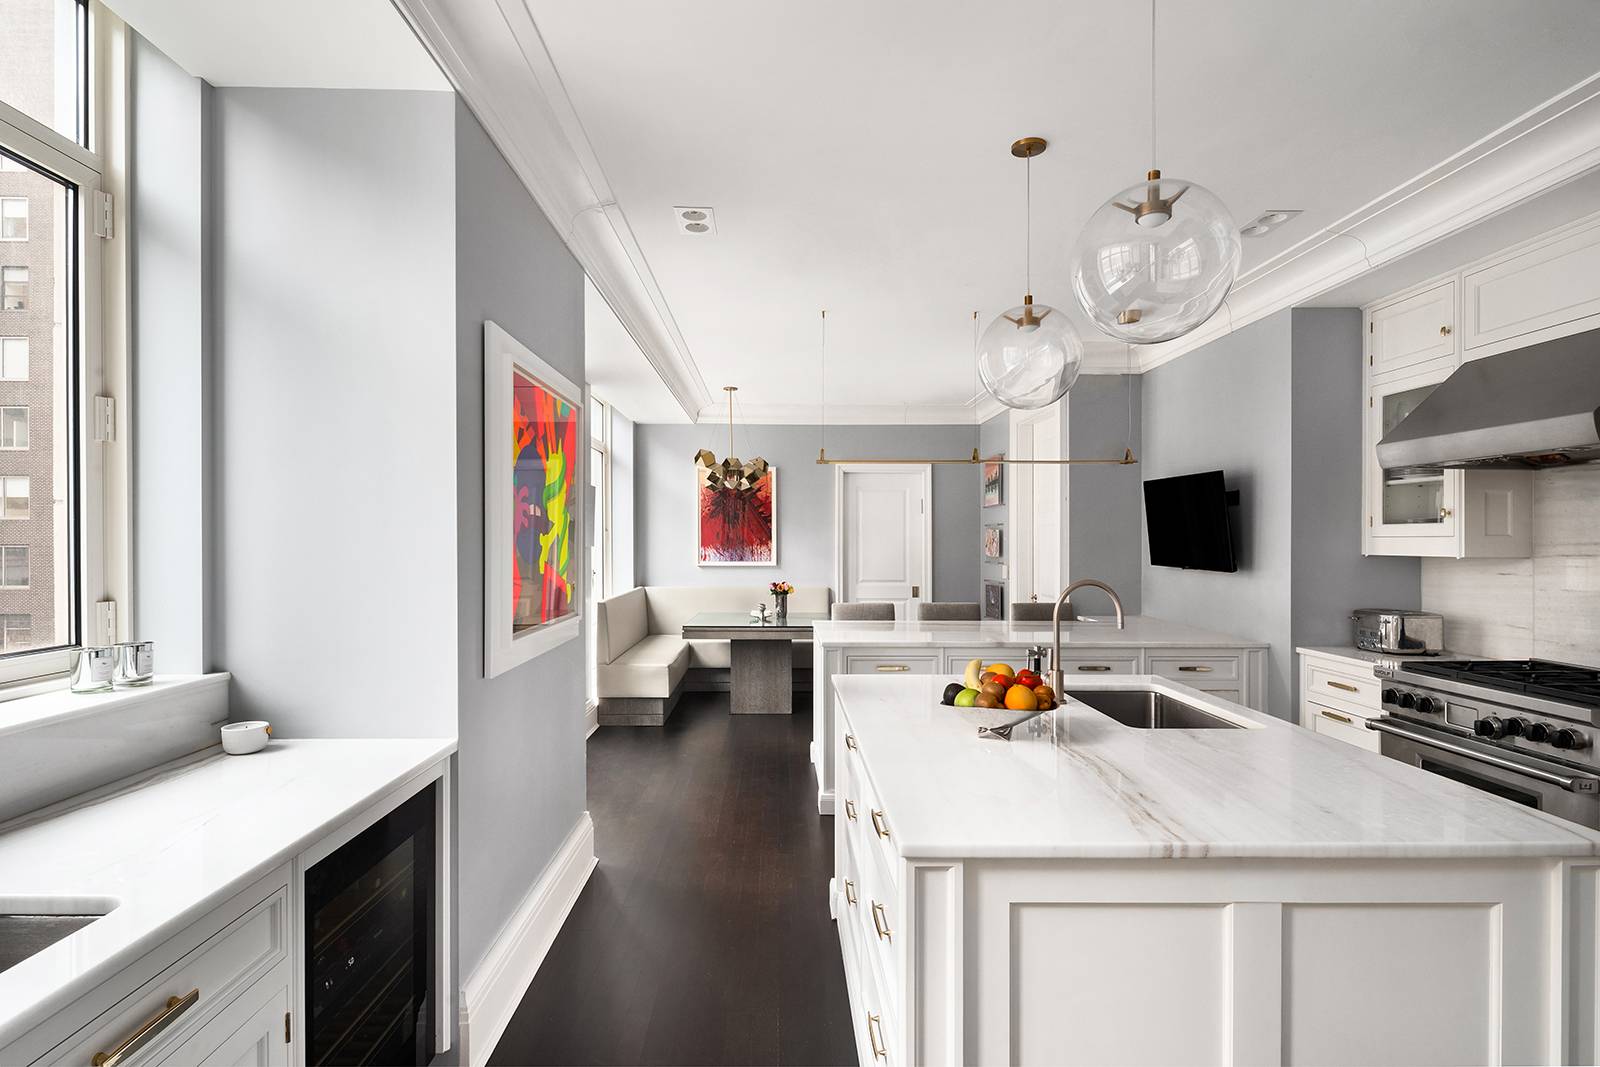 The embodiment of distinguished Upper East Side elegance, this incredible full floor, four bedroom, five and a half bathroom home was impeccably designed and masterfully executed by renowned architect R.